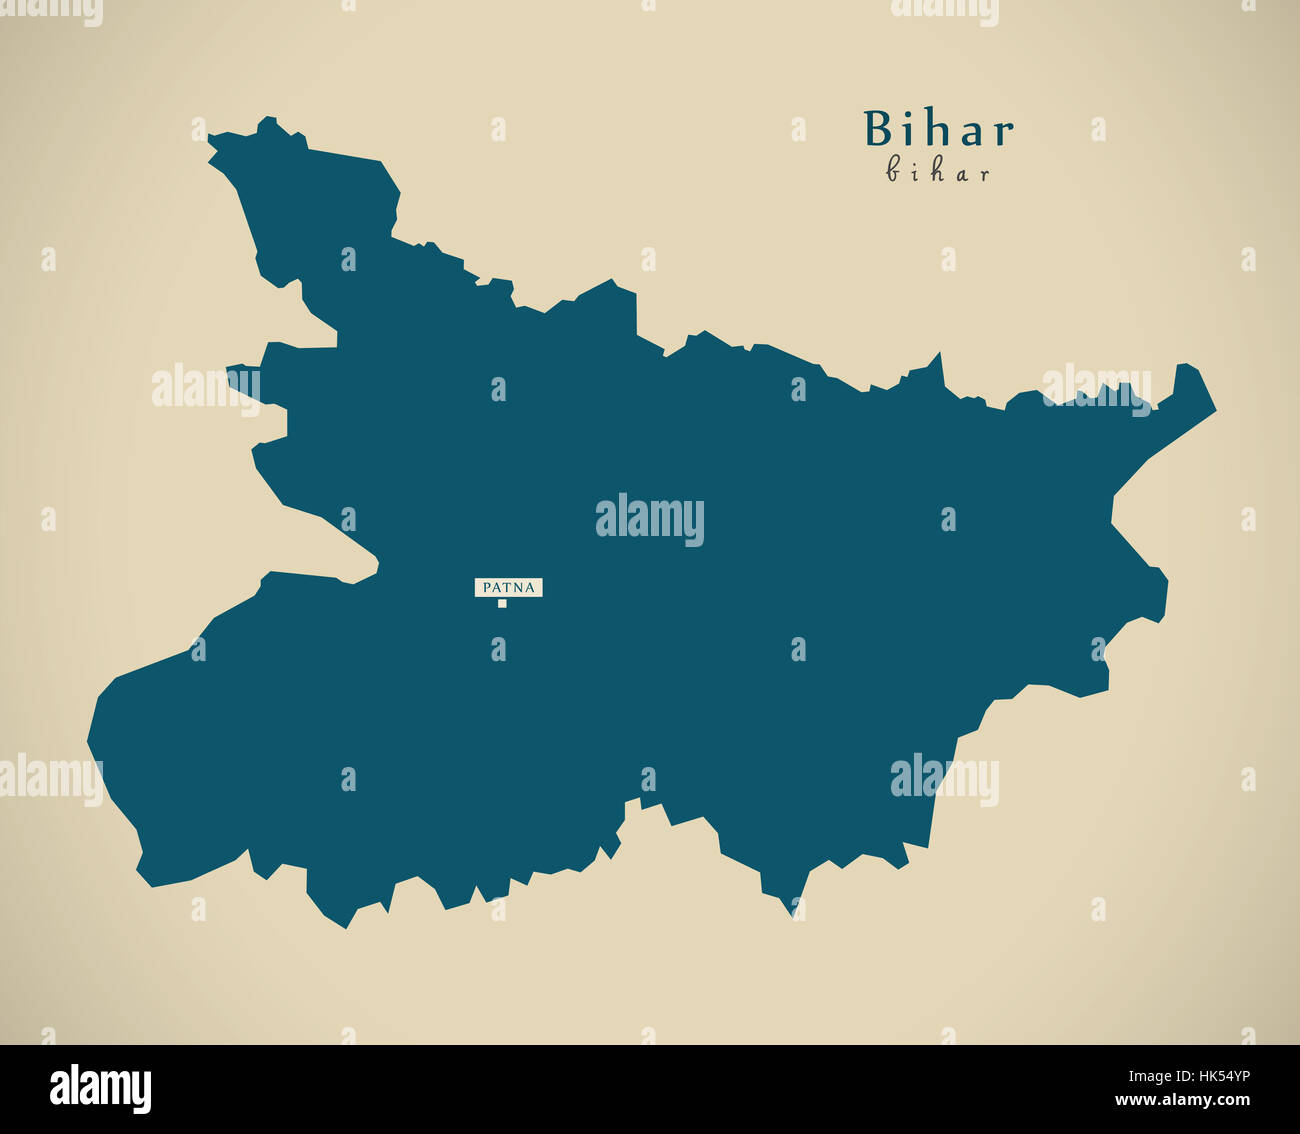 Modern Map - Bihar IN India federal state illustration silhouette Stock Photo